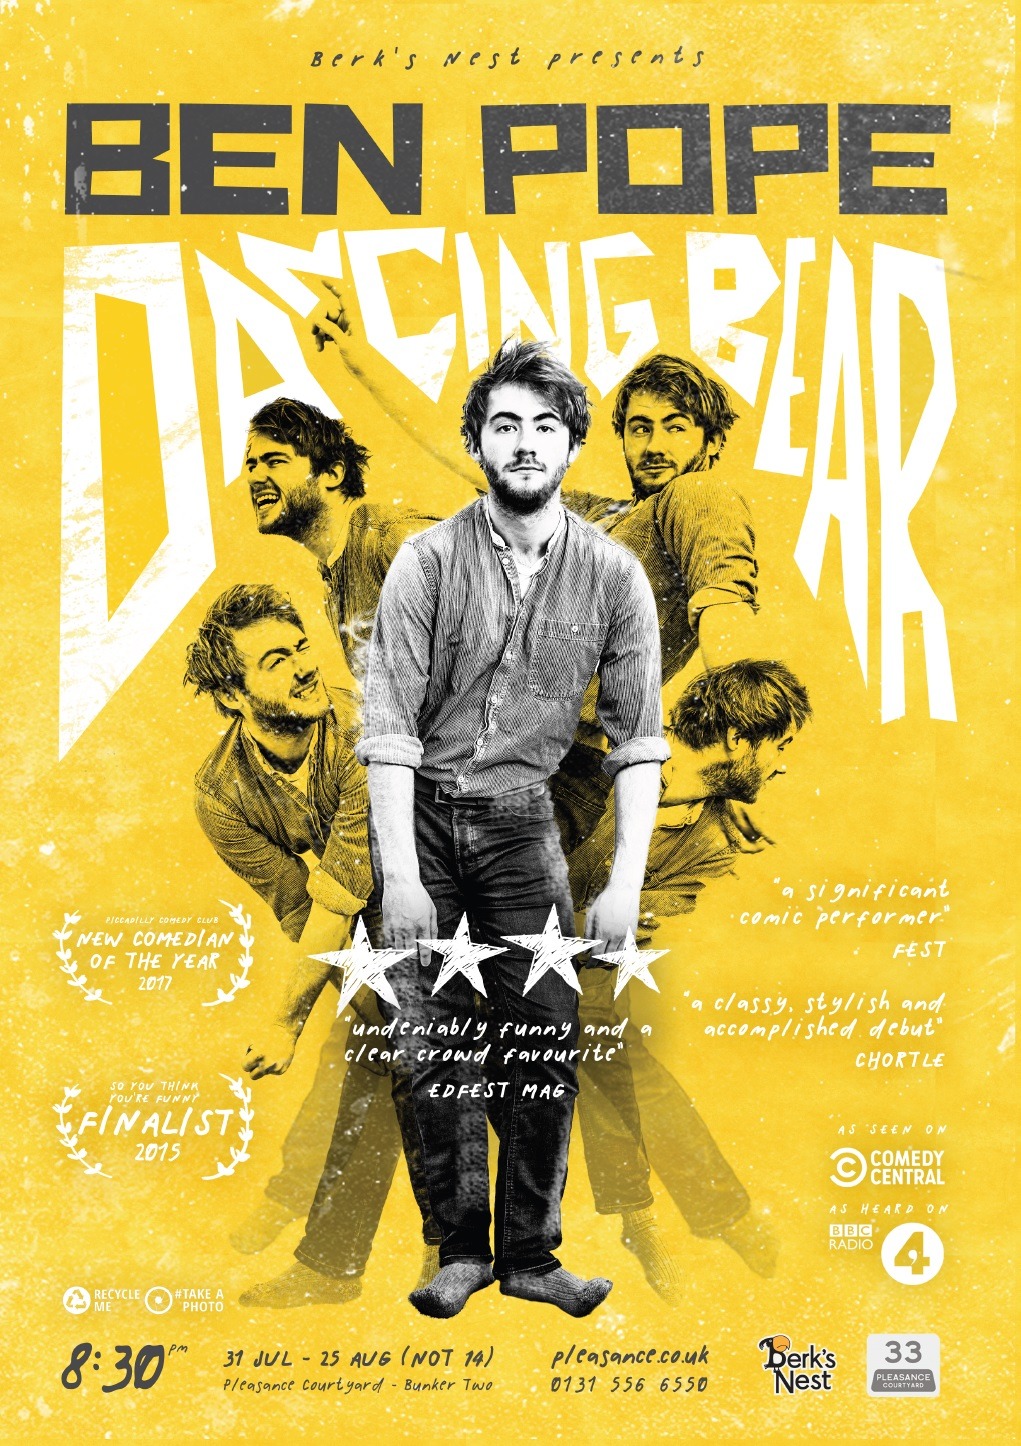 The poster for Ben Pope: Dancing Bear